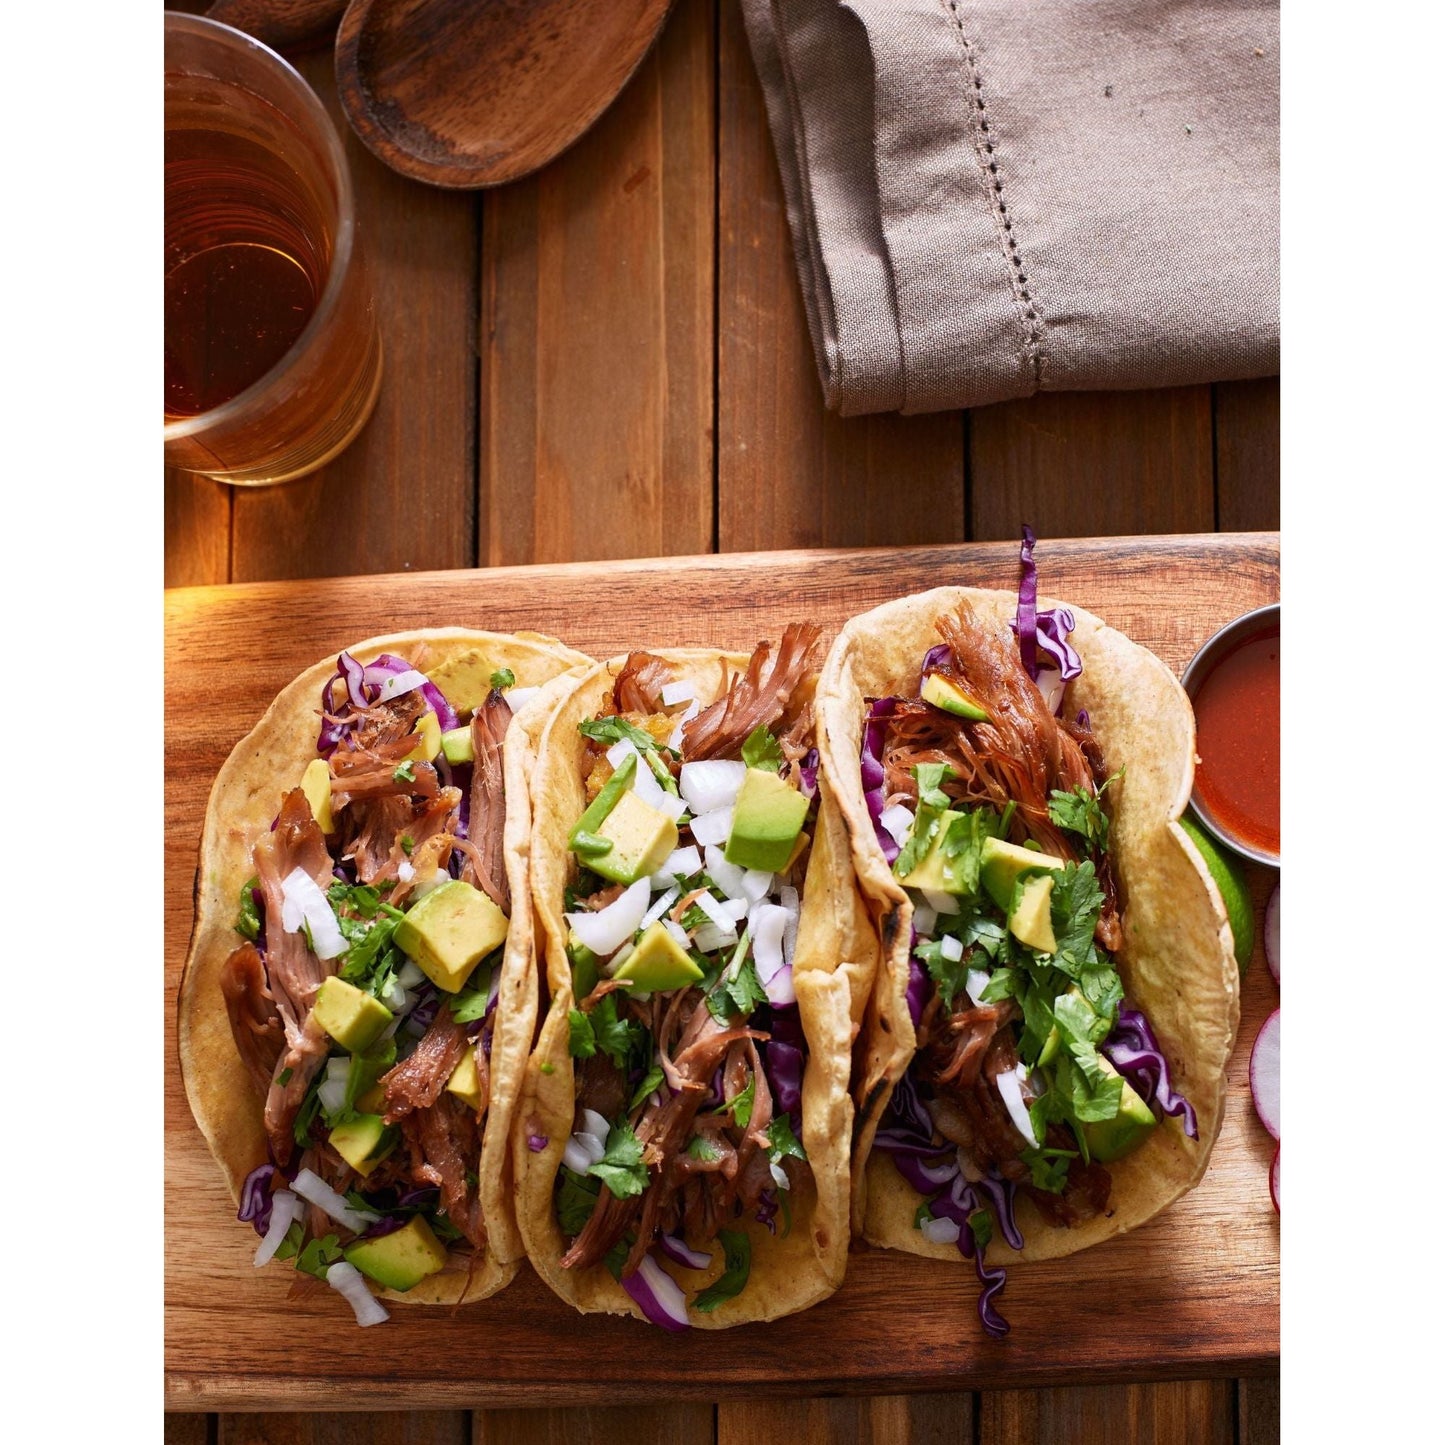 Three delicious tacos with pork, avocado, and cabbage, beautifully presented on a wooden cutting board.